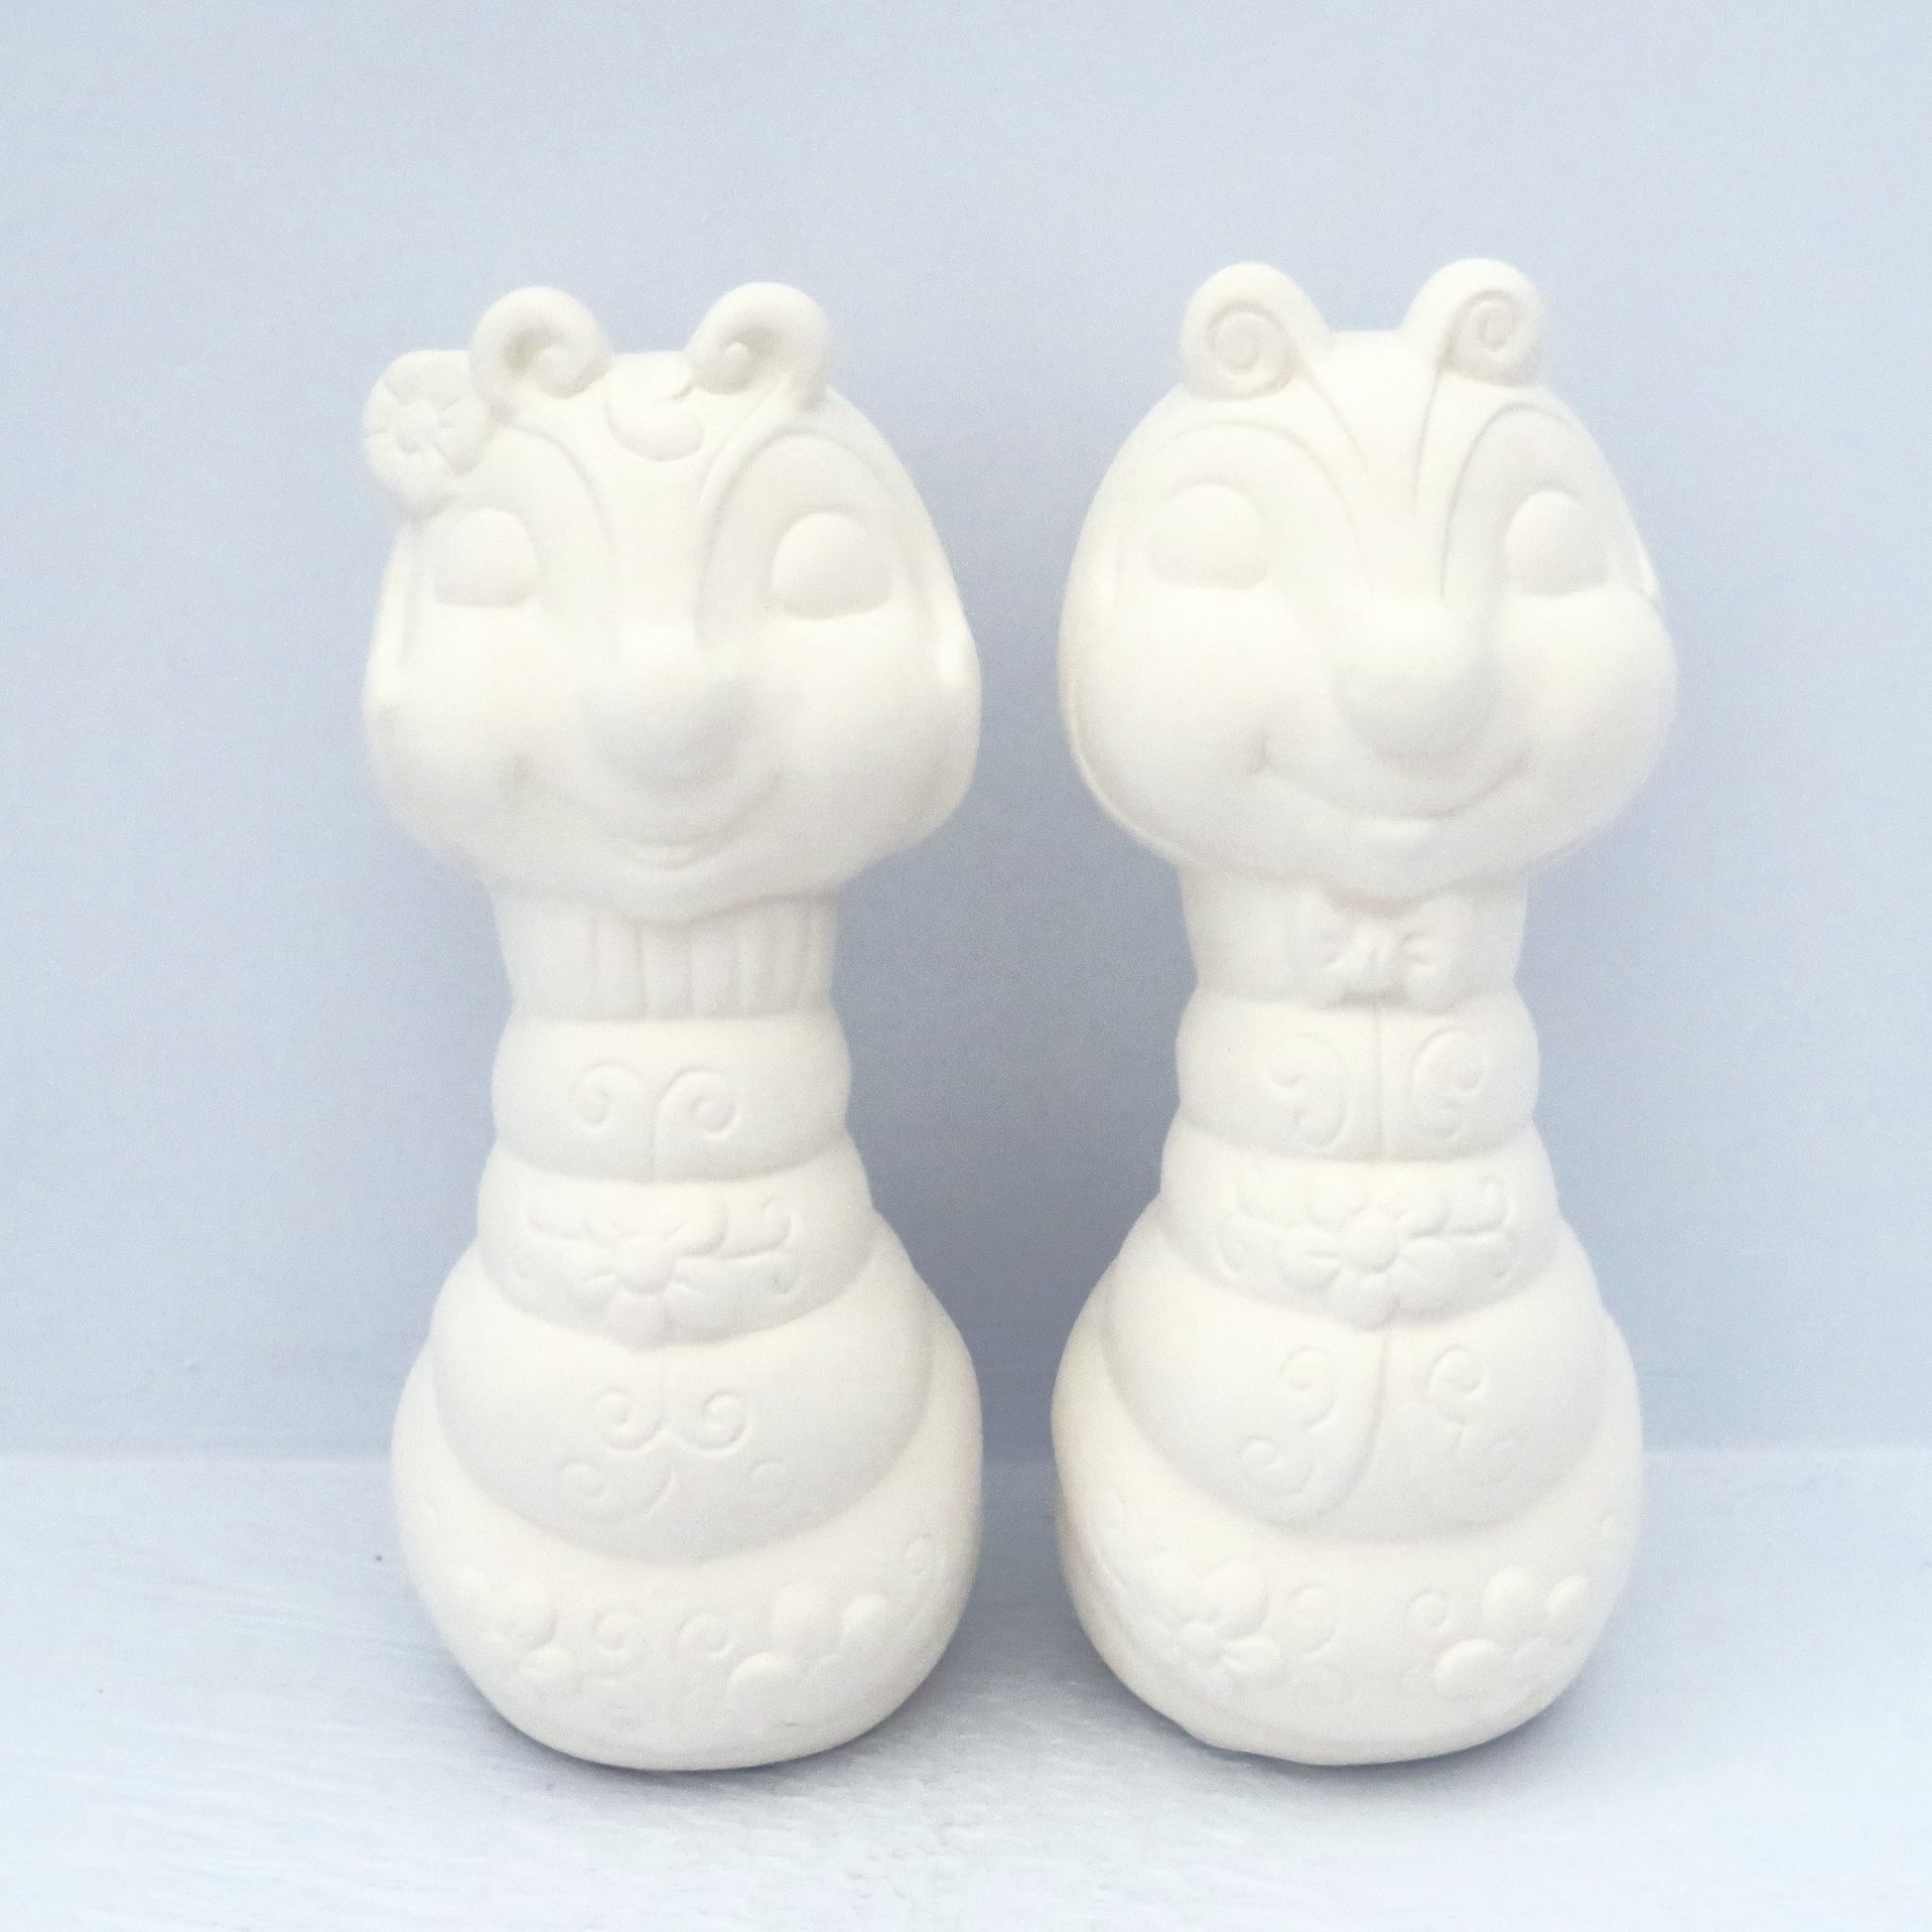 2 handmade unpainted ceramic bug statues facing forward on pale blue background